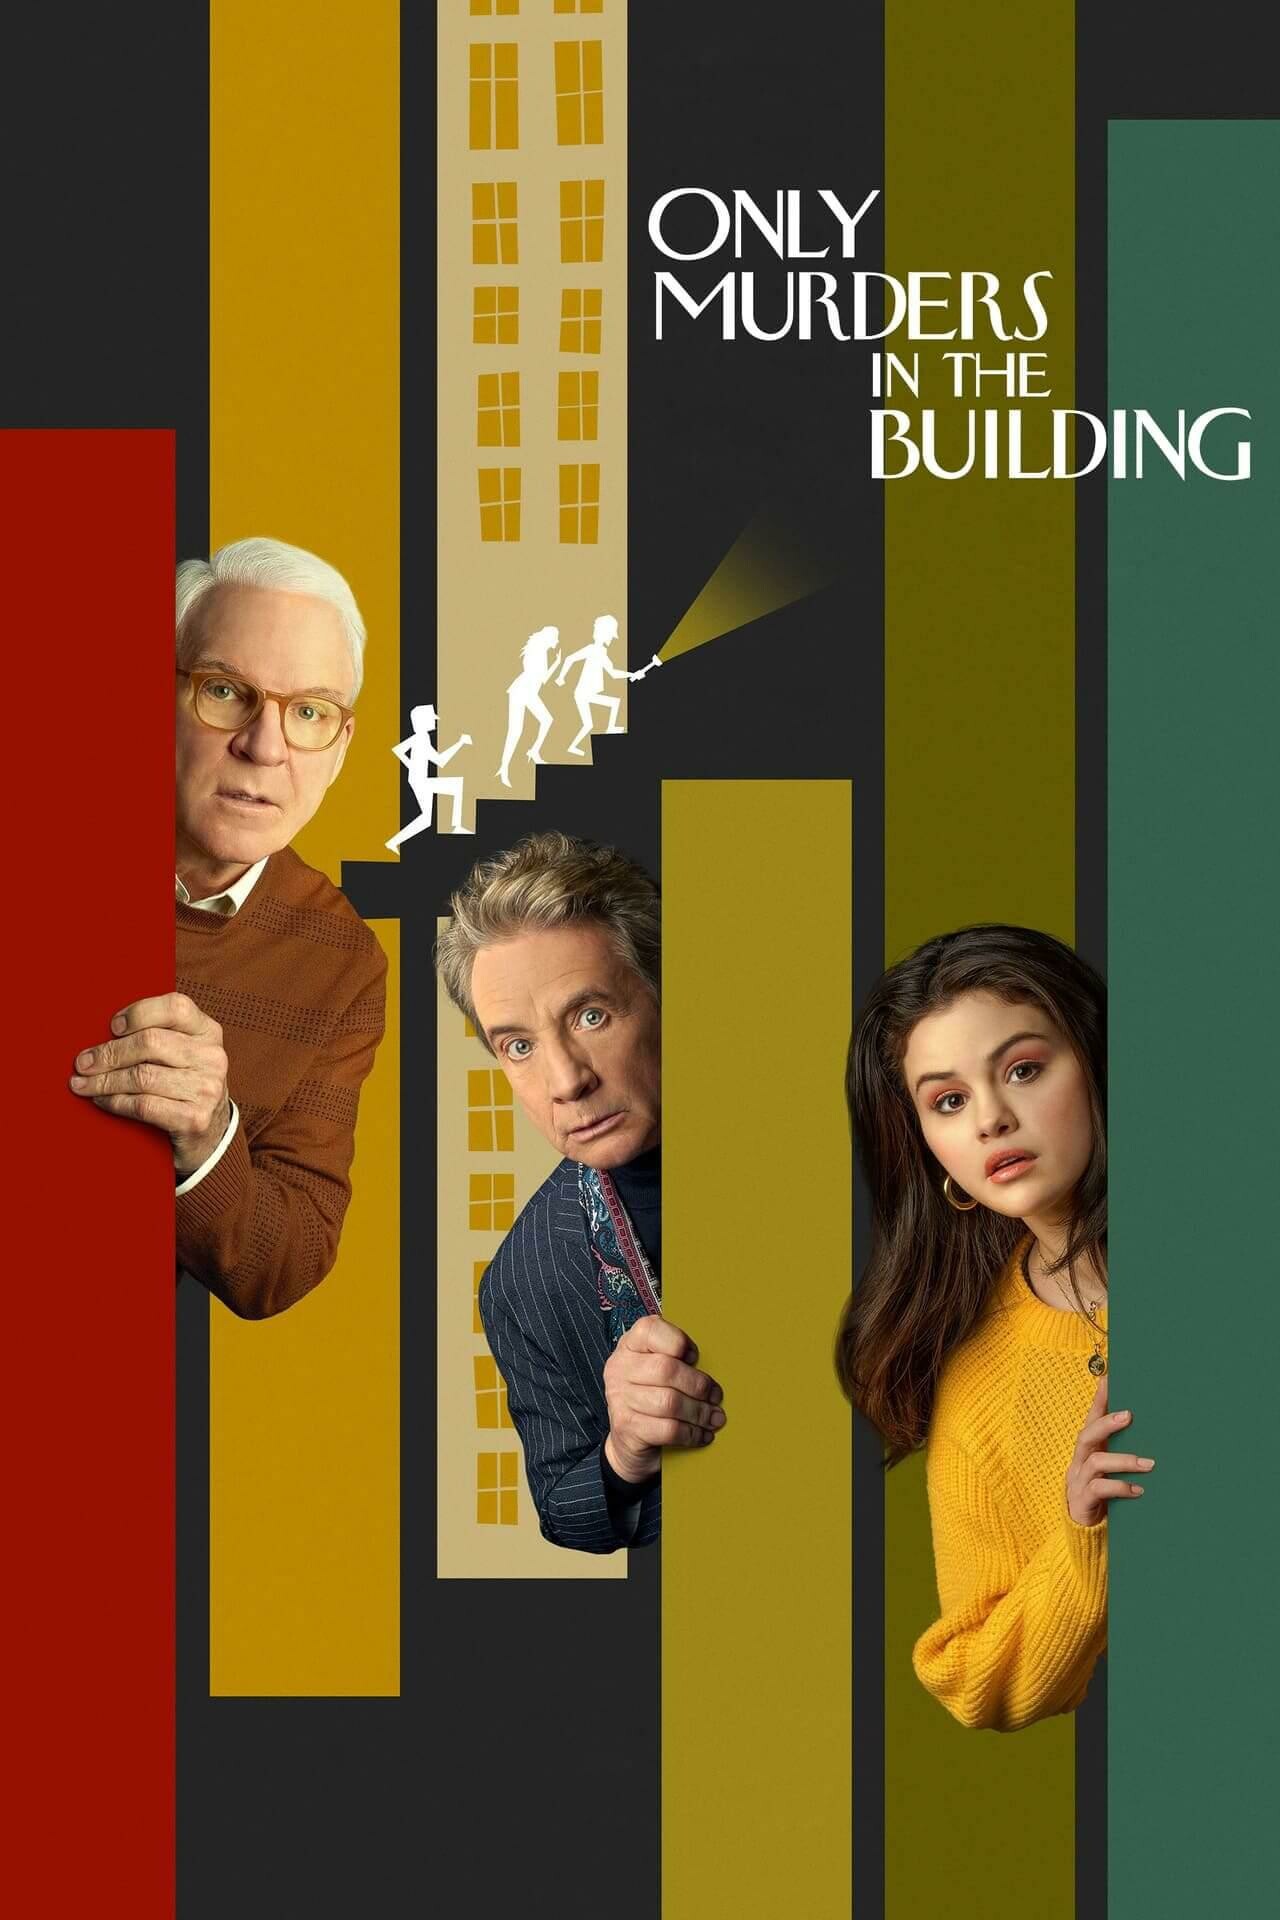 Only Murders in the Building: Steve Martin's first regular starring role in a television series. 1280x1920 HD Wallpaper.